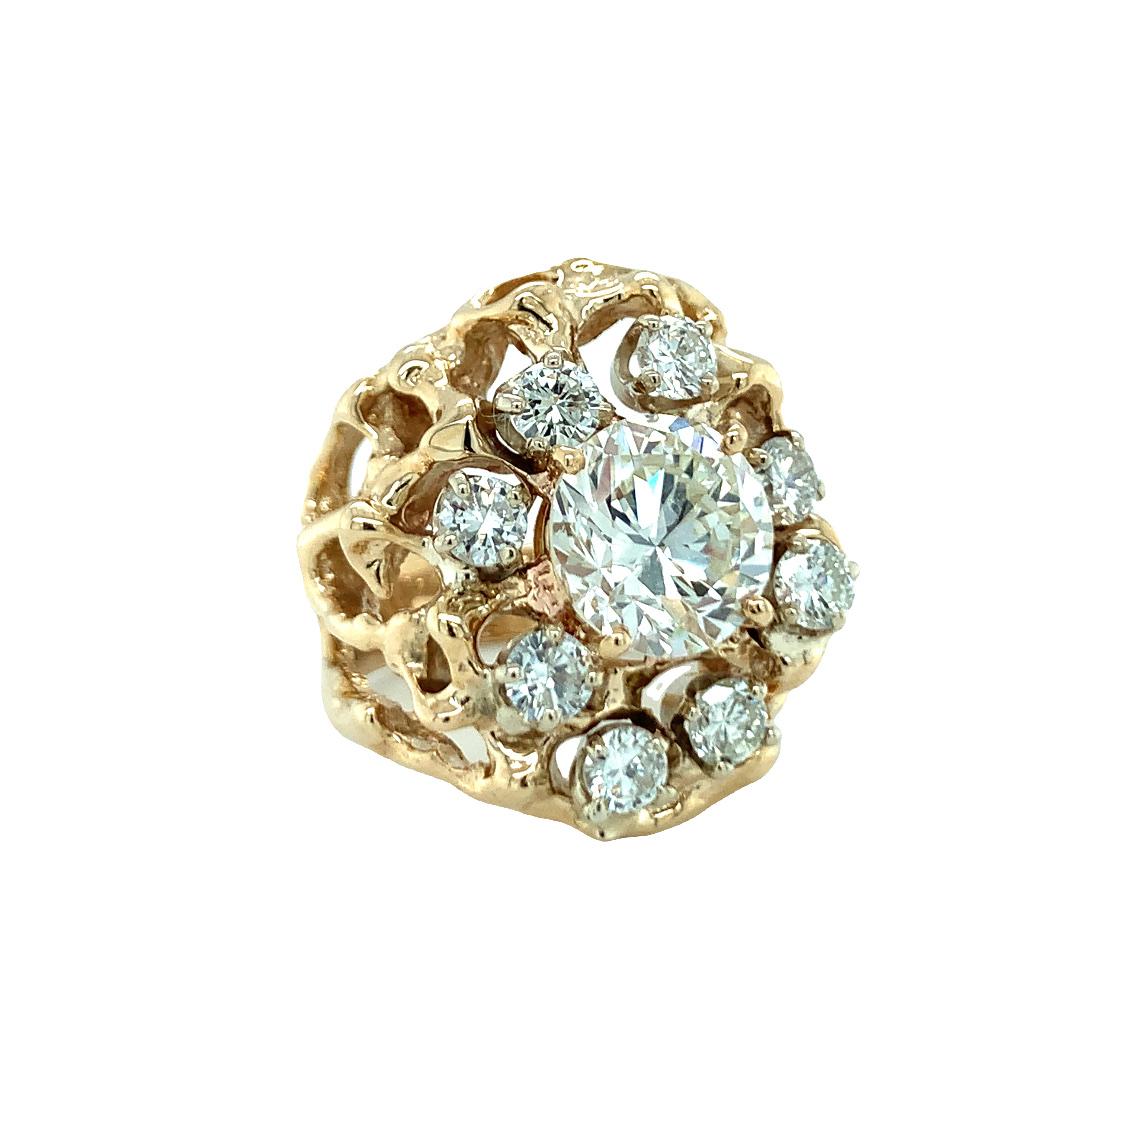 One diamond cluster 14K yellow gold ring in gold nugget, open work style centering one round brilliant cut diamond weighing 2.94 ct. with L-M color and VS-1 clarity. The ring is enhanced by 8 round brilliant cut diamonds weighing a total of 1.20 ct.